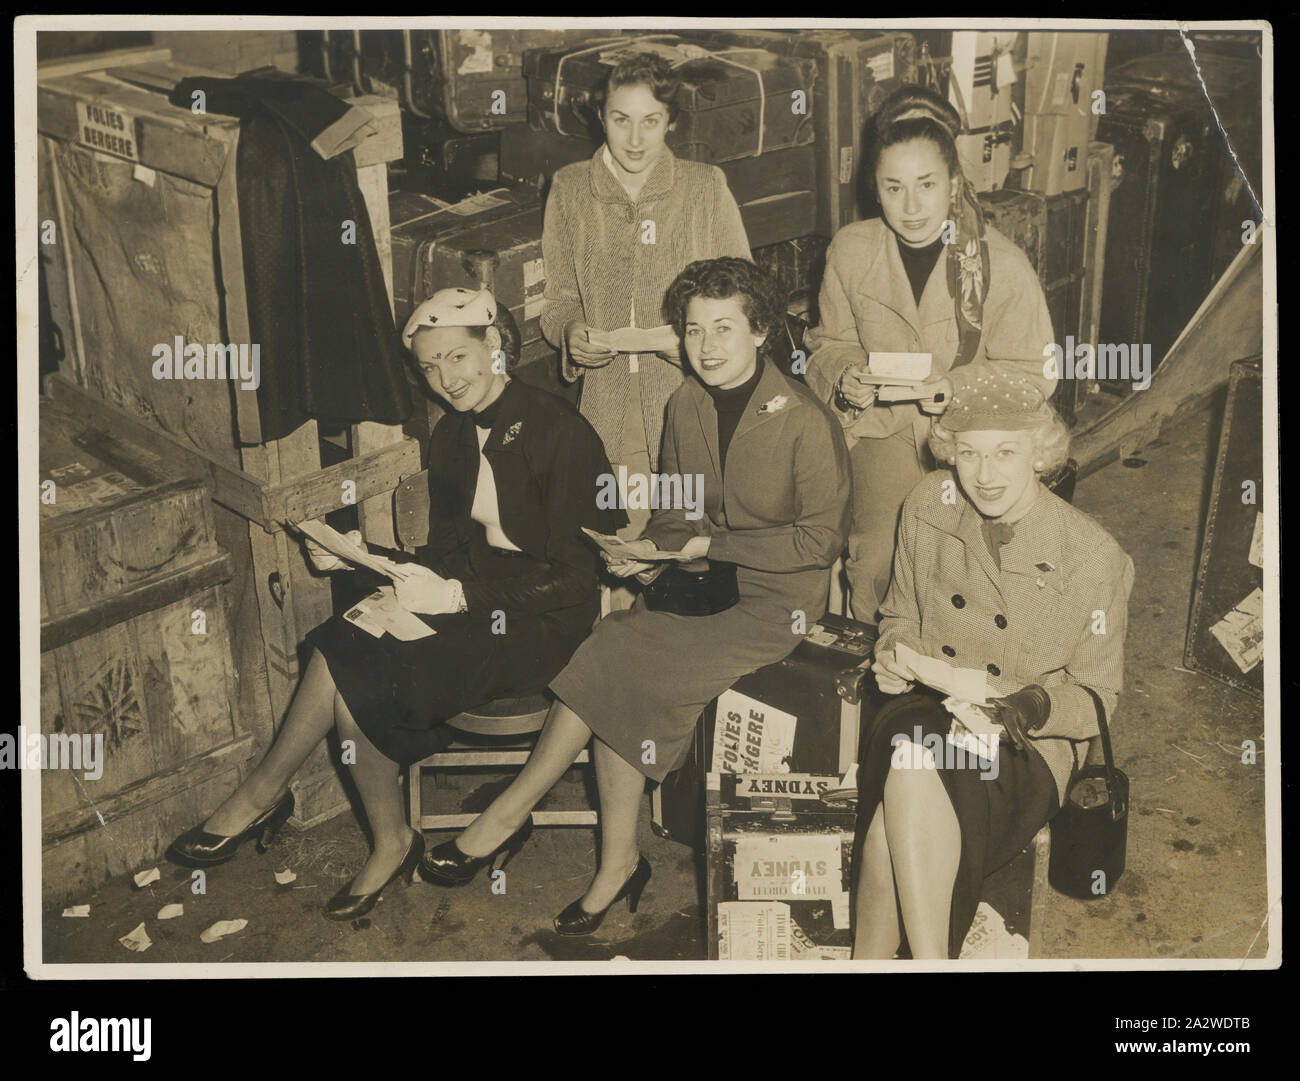 Photograph - Bernice Kopple and four Folies Bergere Dancers, Australia, 1950s, Photograph of Bernice Kopple (centre) and four other dancers of the Folies Bergere Show on the Tivoli Circuit tour in Australia,1950s, in street clothes seated among suitcases, probably backstage before going to Sydney. In the 1950s and 1960s Bernice Kopple worked as a fashion photographic model and as a performer on the Tivoli Circuit. Bernice Kopple was born in Glasgow, Scotland in 1930 Stock Photo